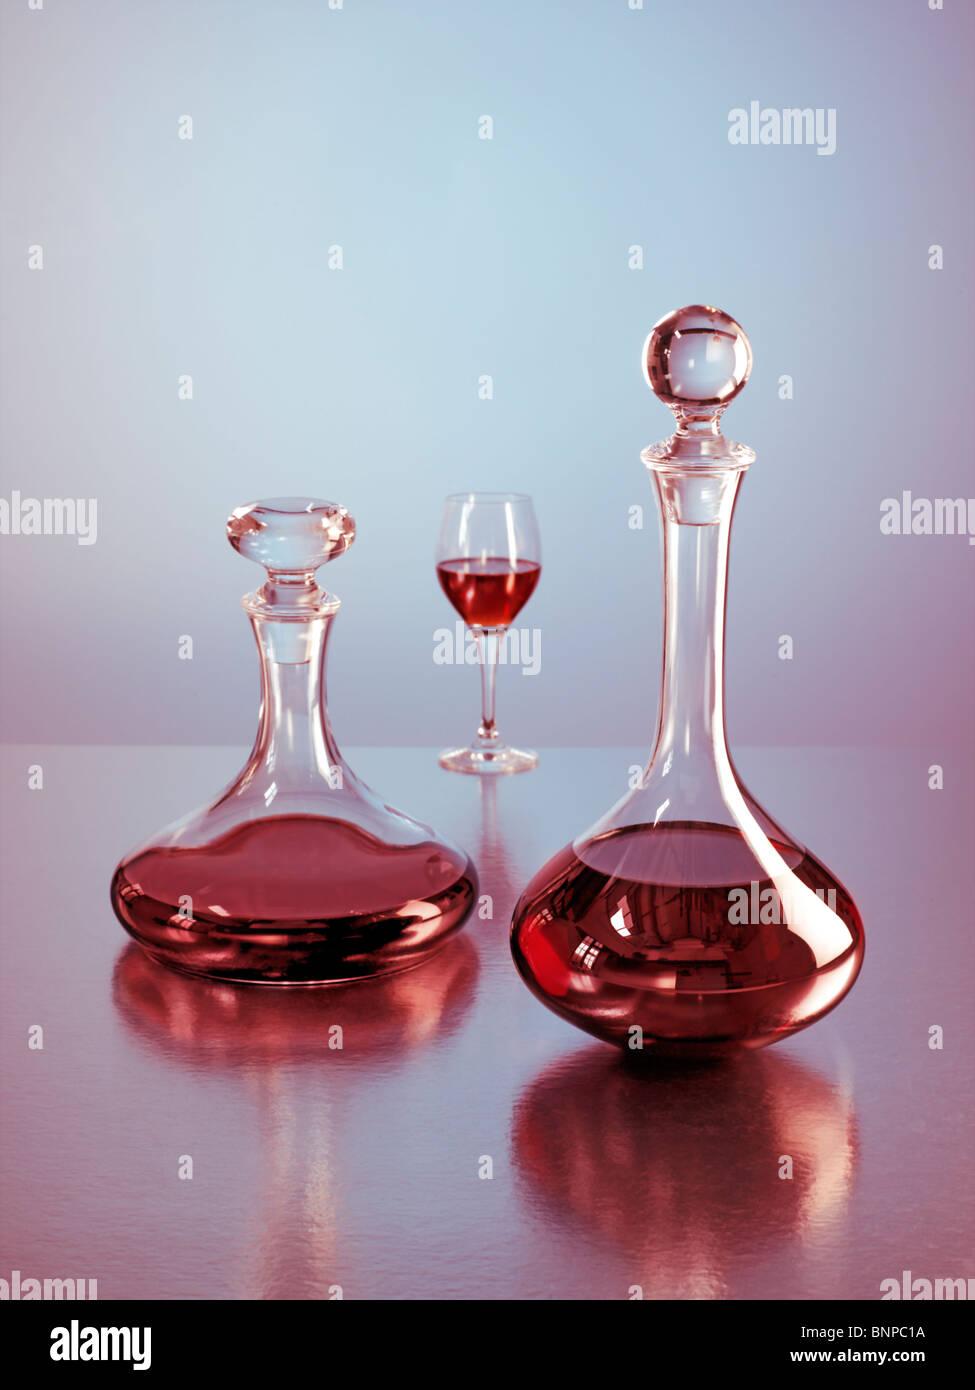 Two decanters with red wine and glass in background Stock Photo